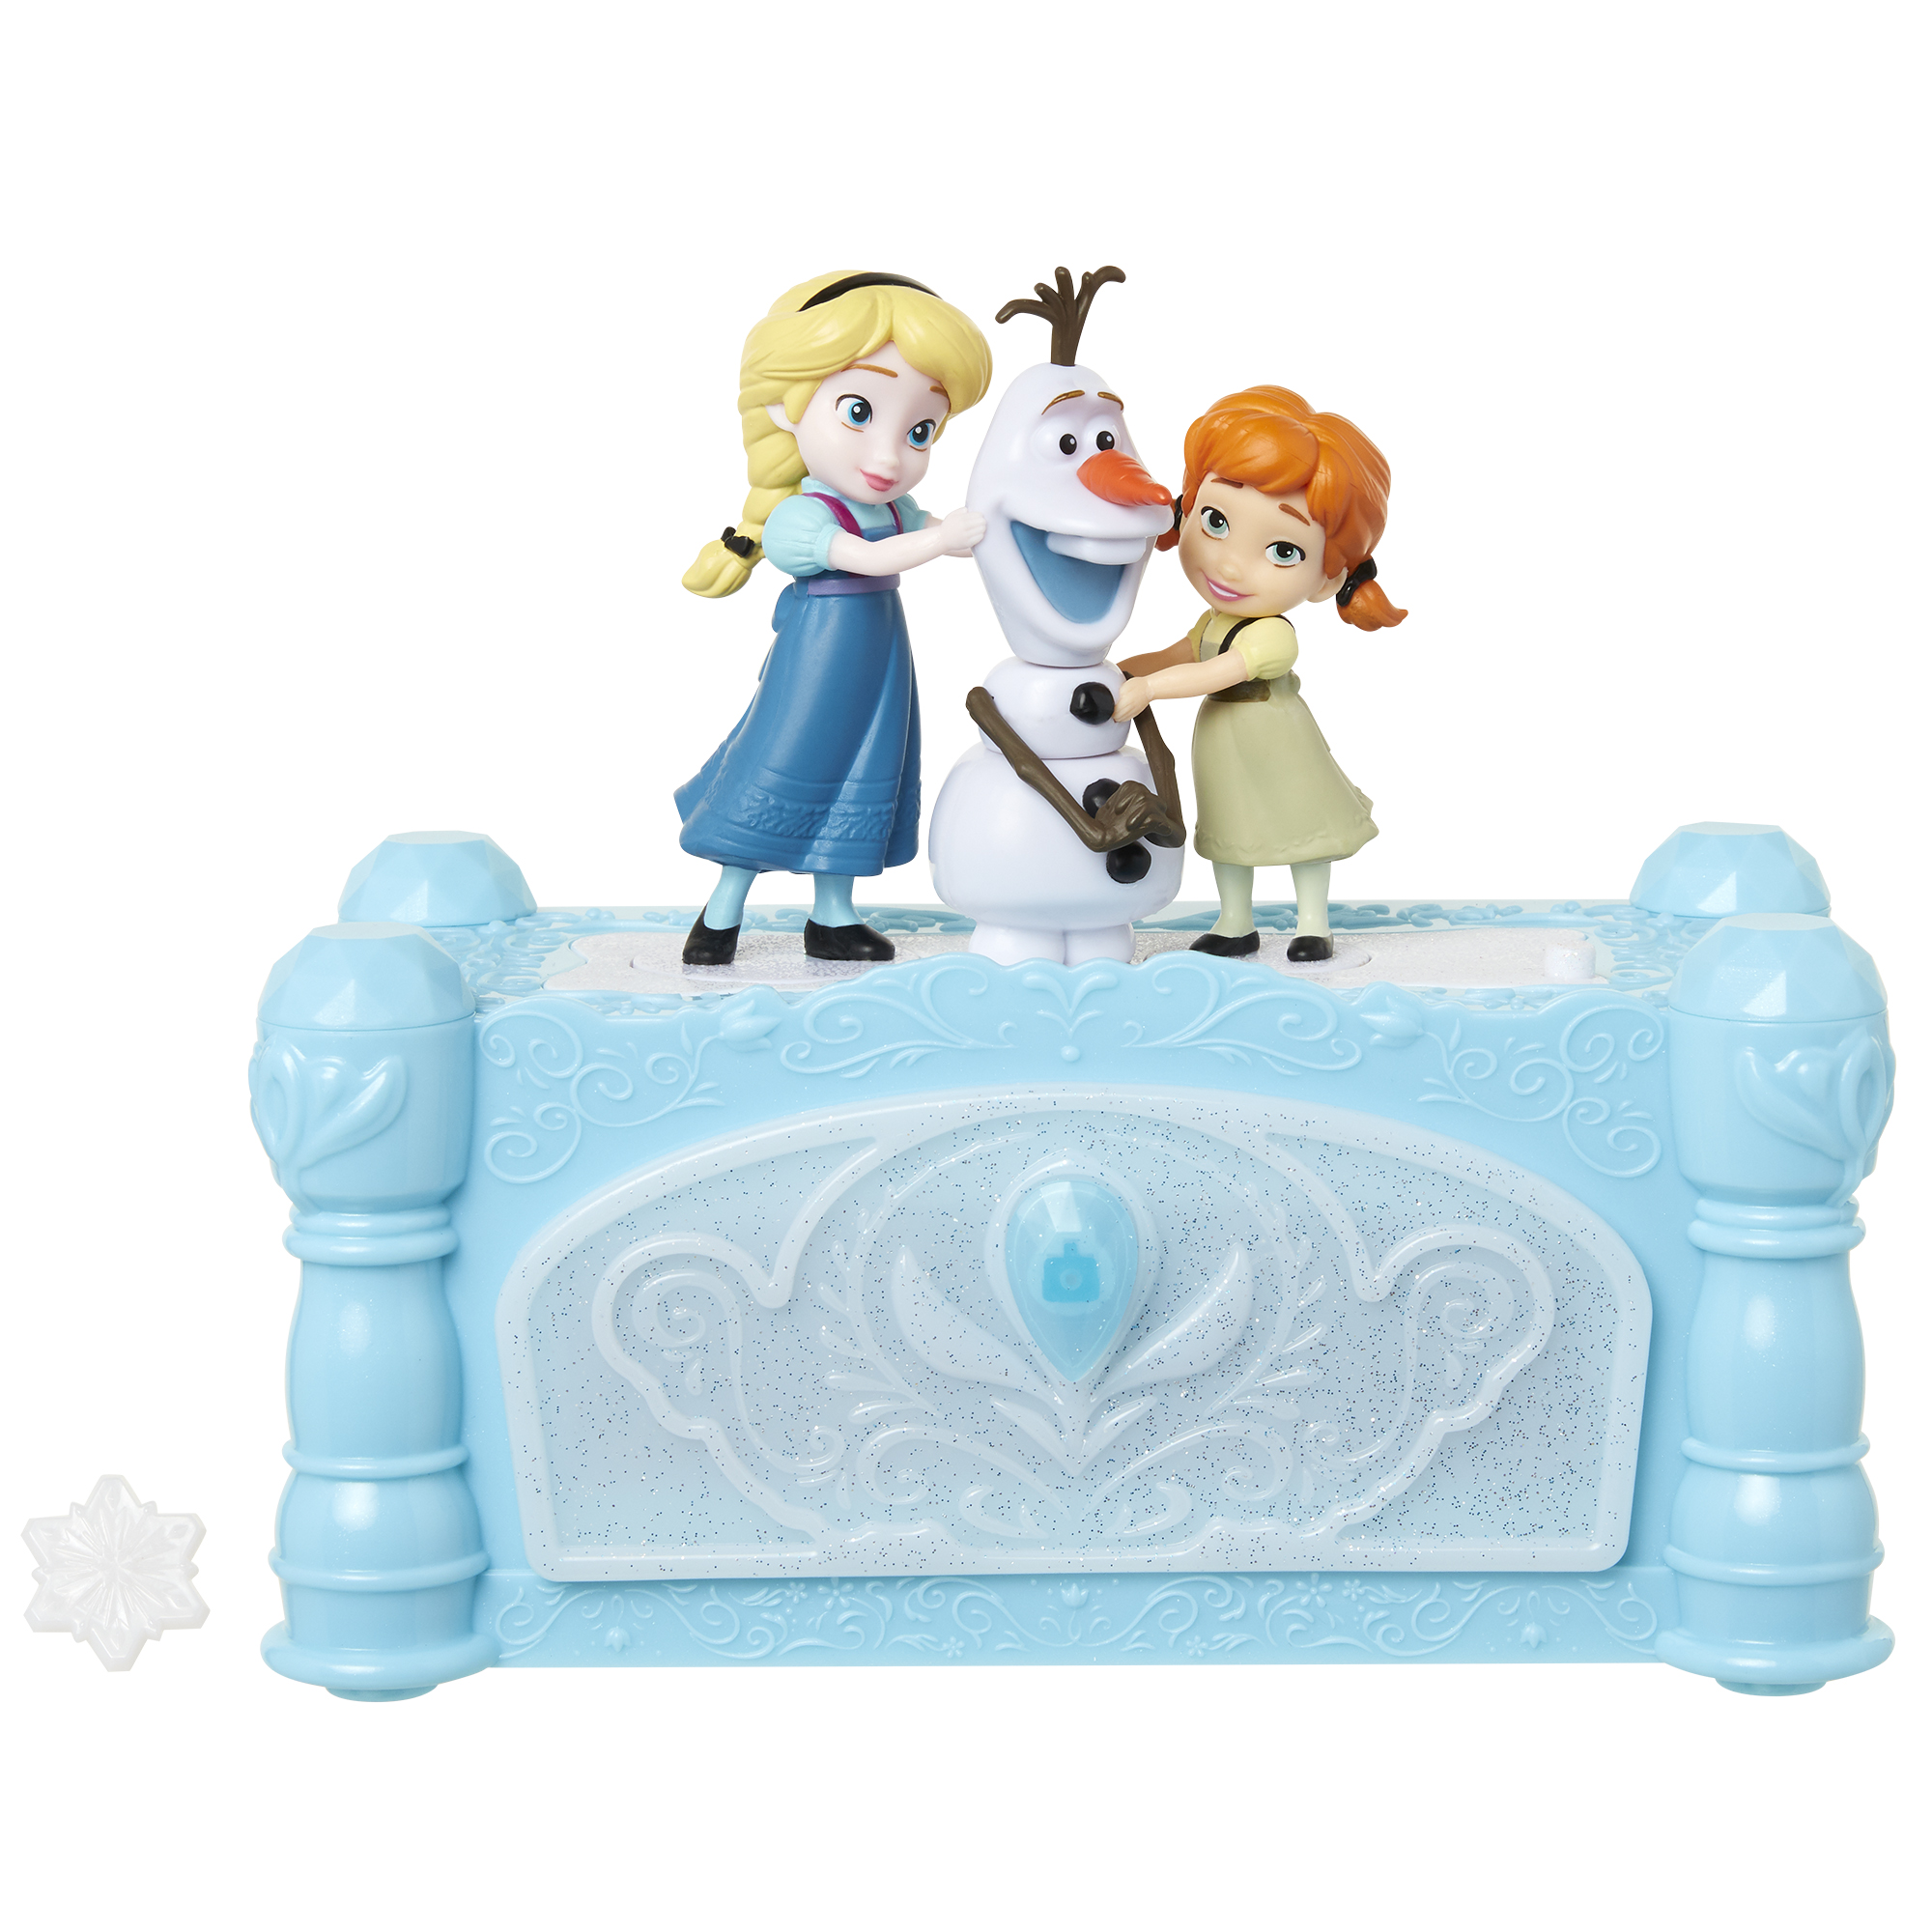 Disney Frozen Do You Want to Build A Snowman 2.0 Jewelry Box - image 1 of 12